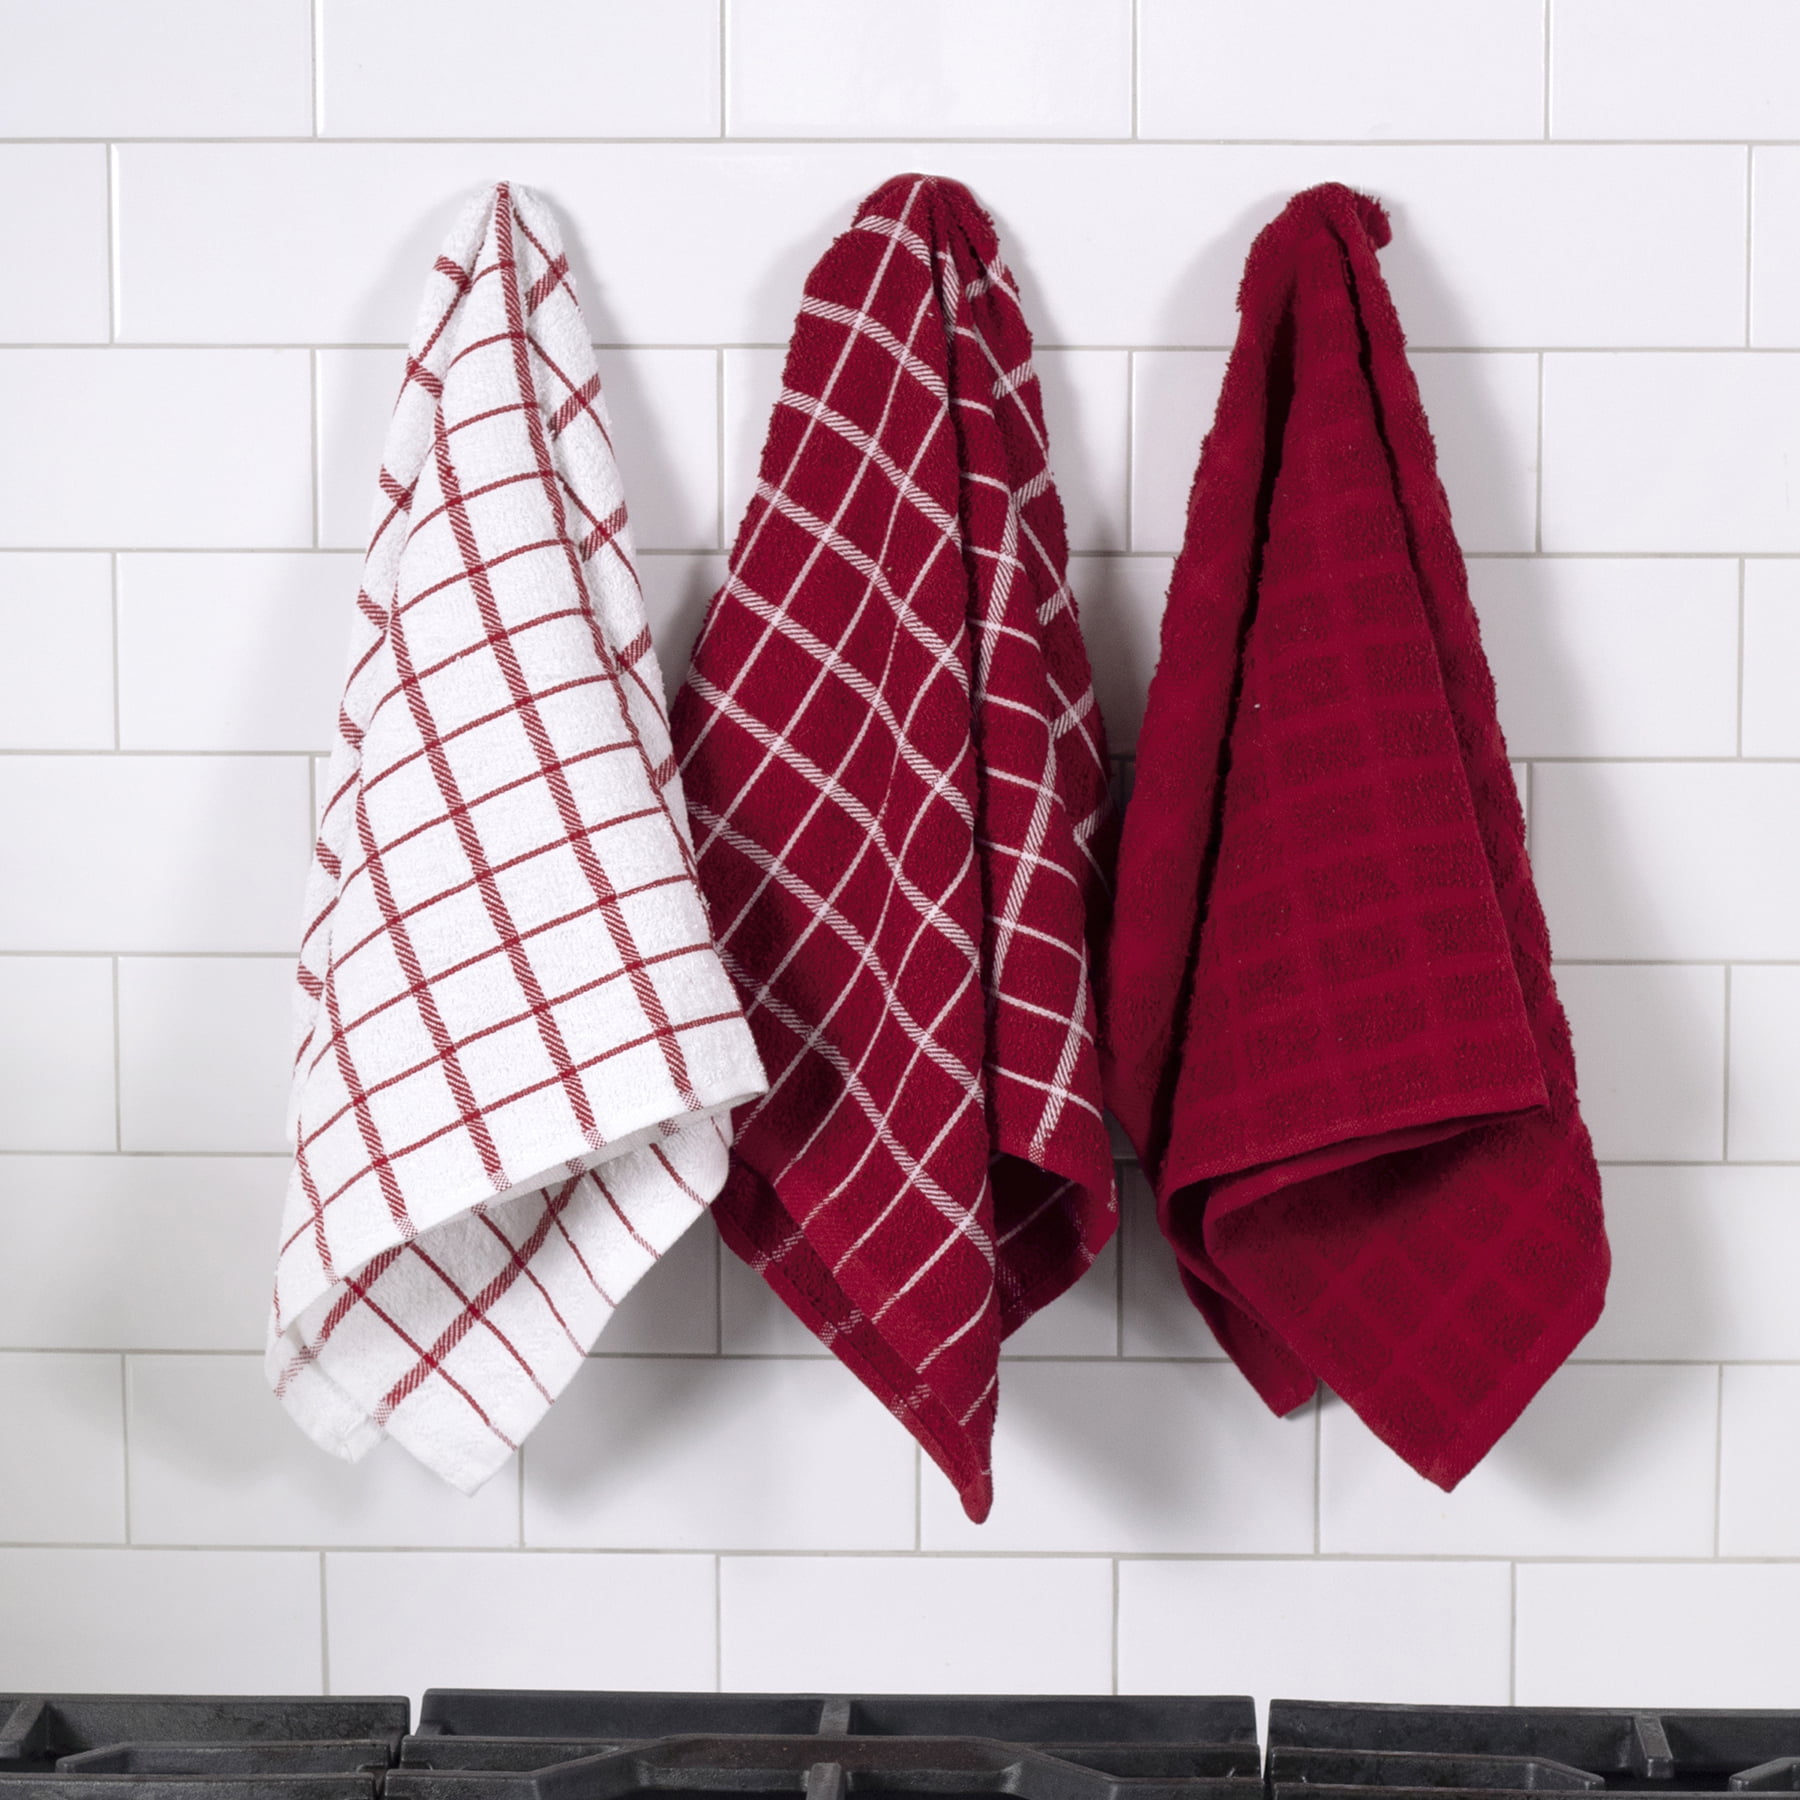 Ritz 100% Cotton Terry Kitchen Dish Towels, Highly Absorbent, 25” x 15”,  3-Pack, Cactus